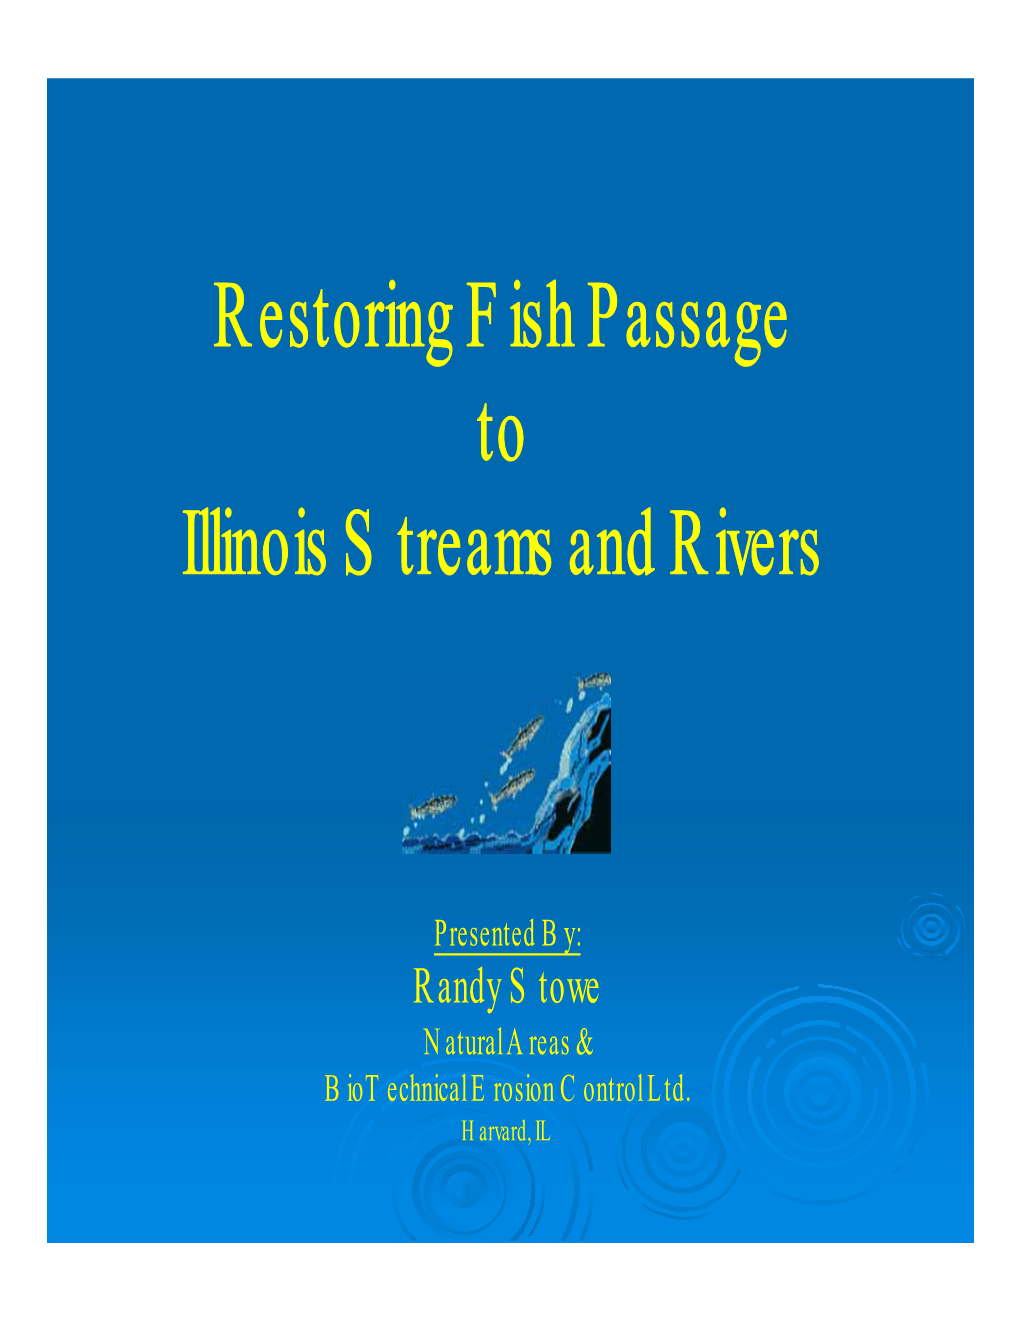 Restoring Fish Passage to Illinois Streams and Rivers